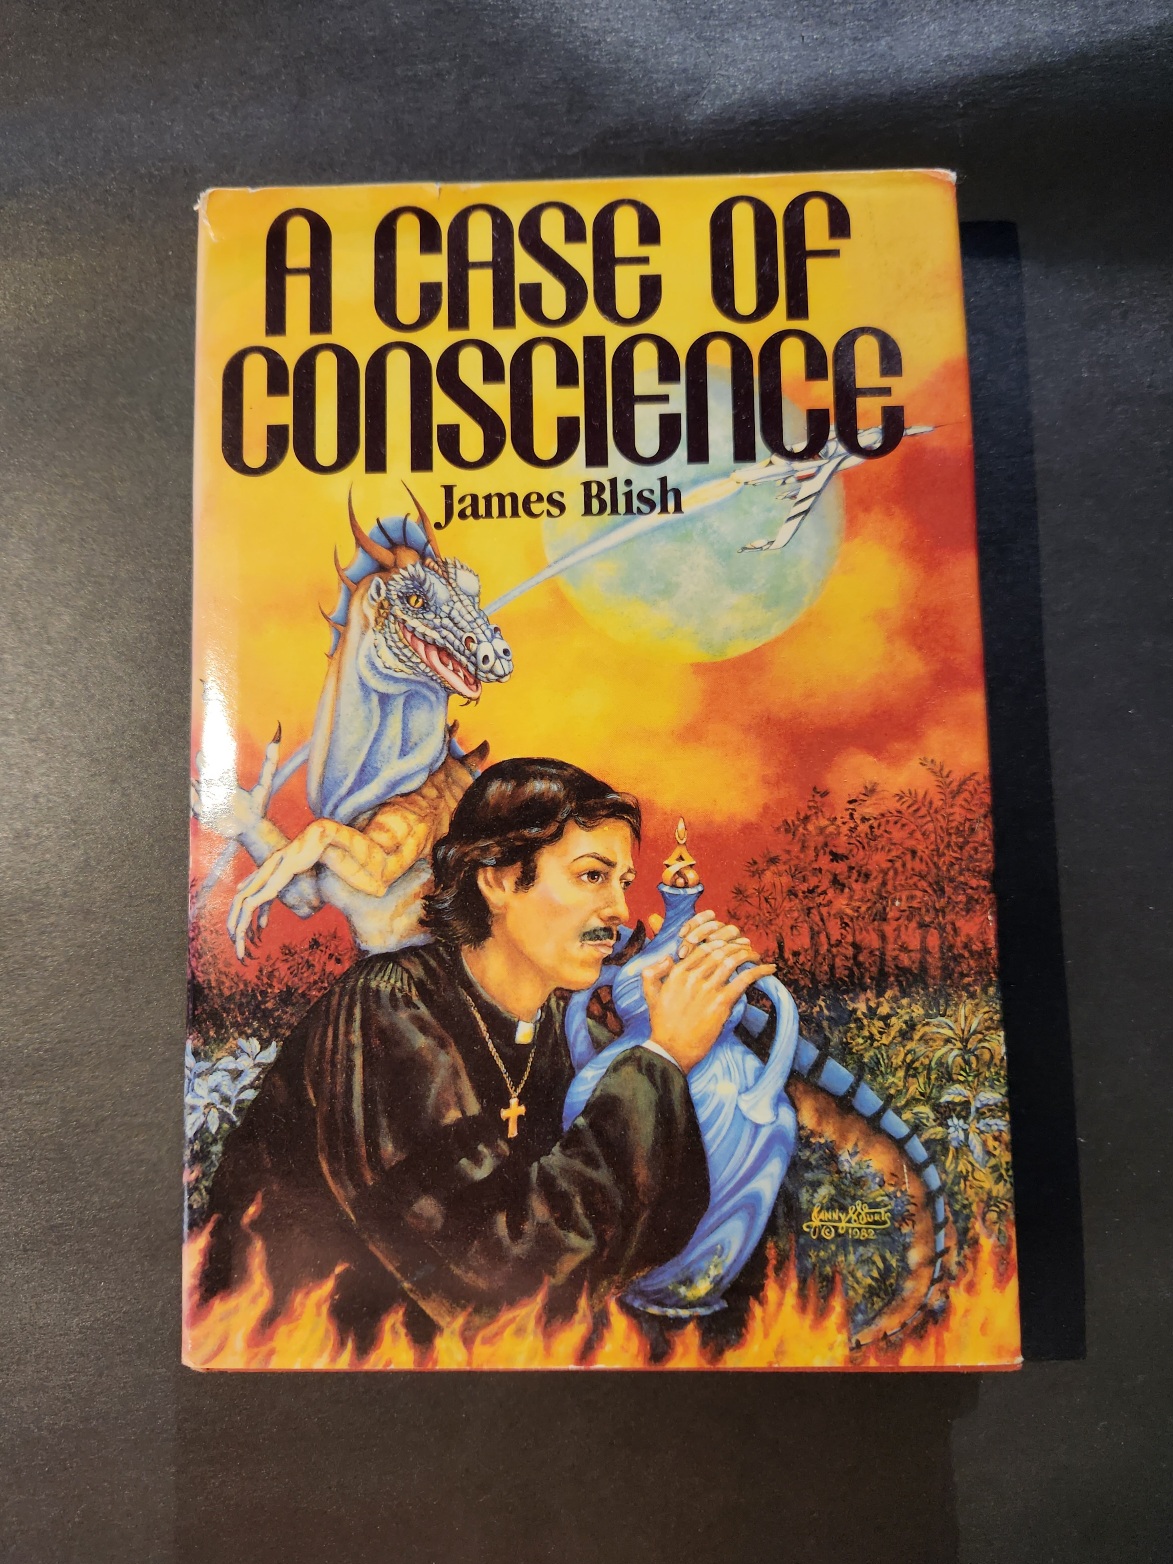 A Case of Conscience by James Blish Book Club Edition BCE 1958 Del Rey